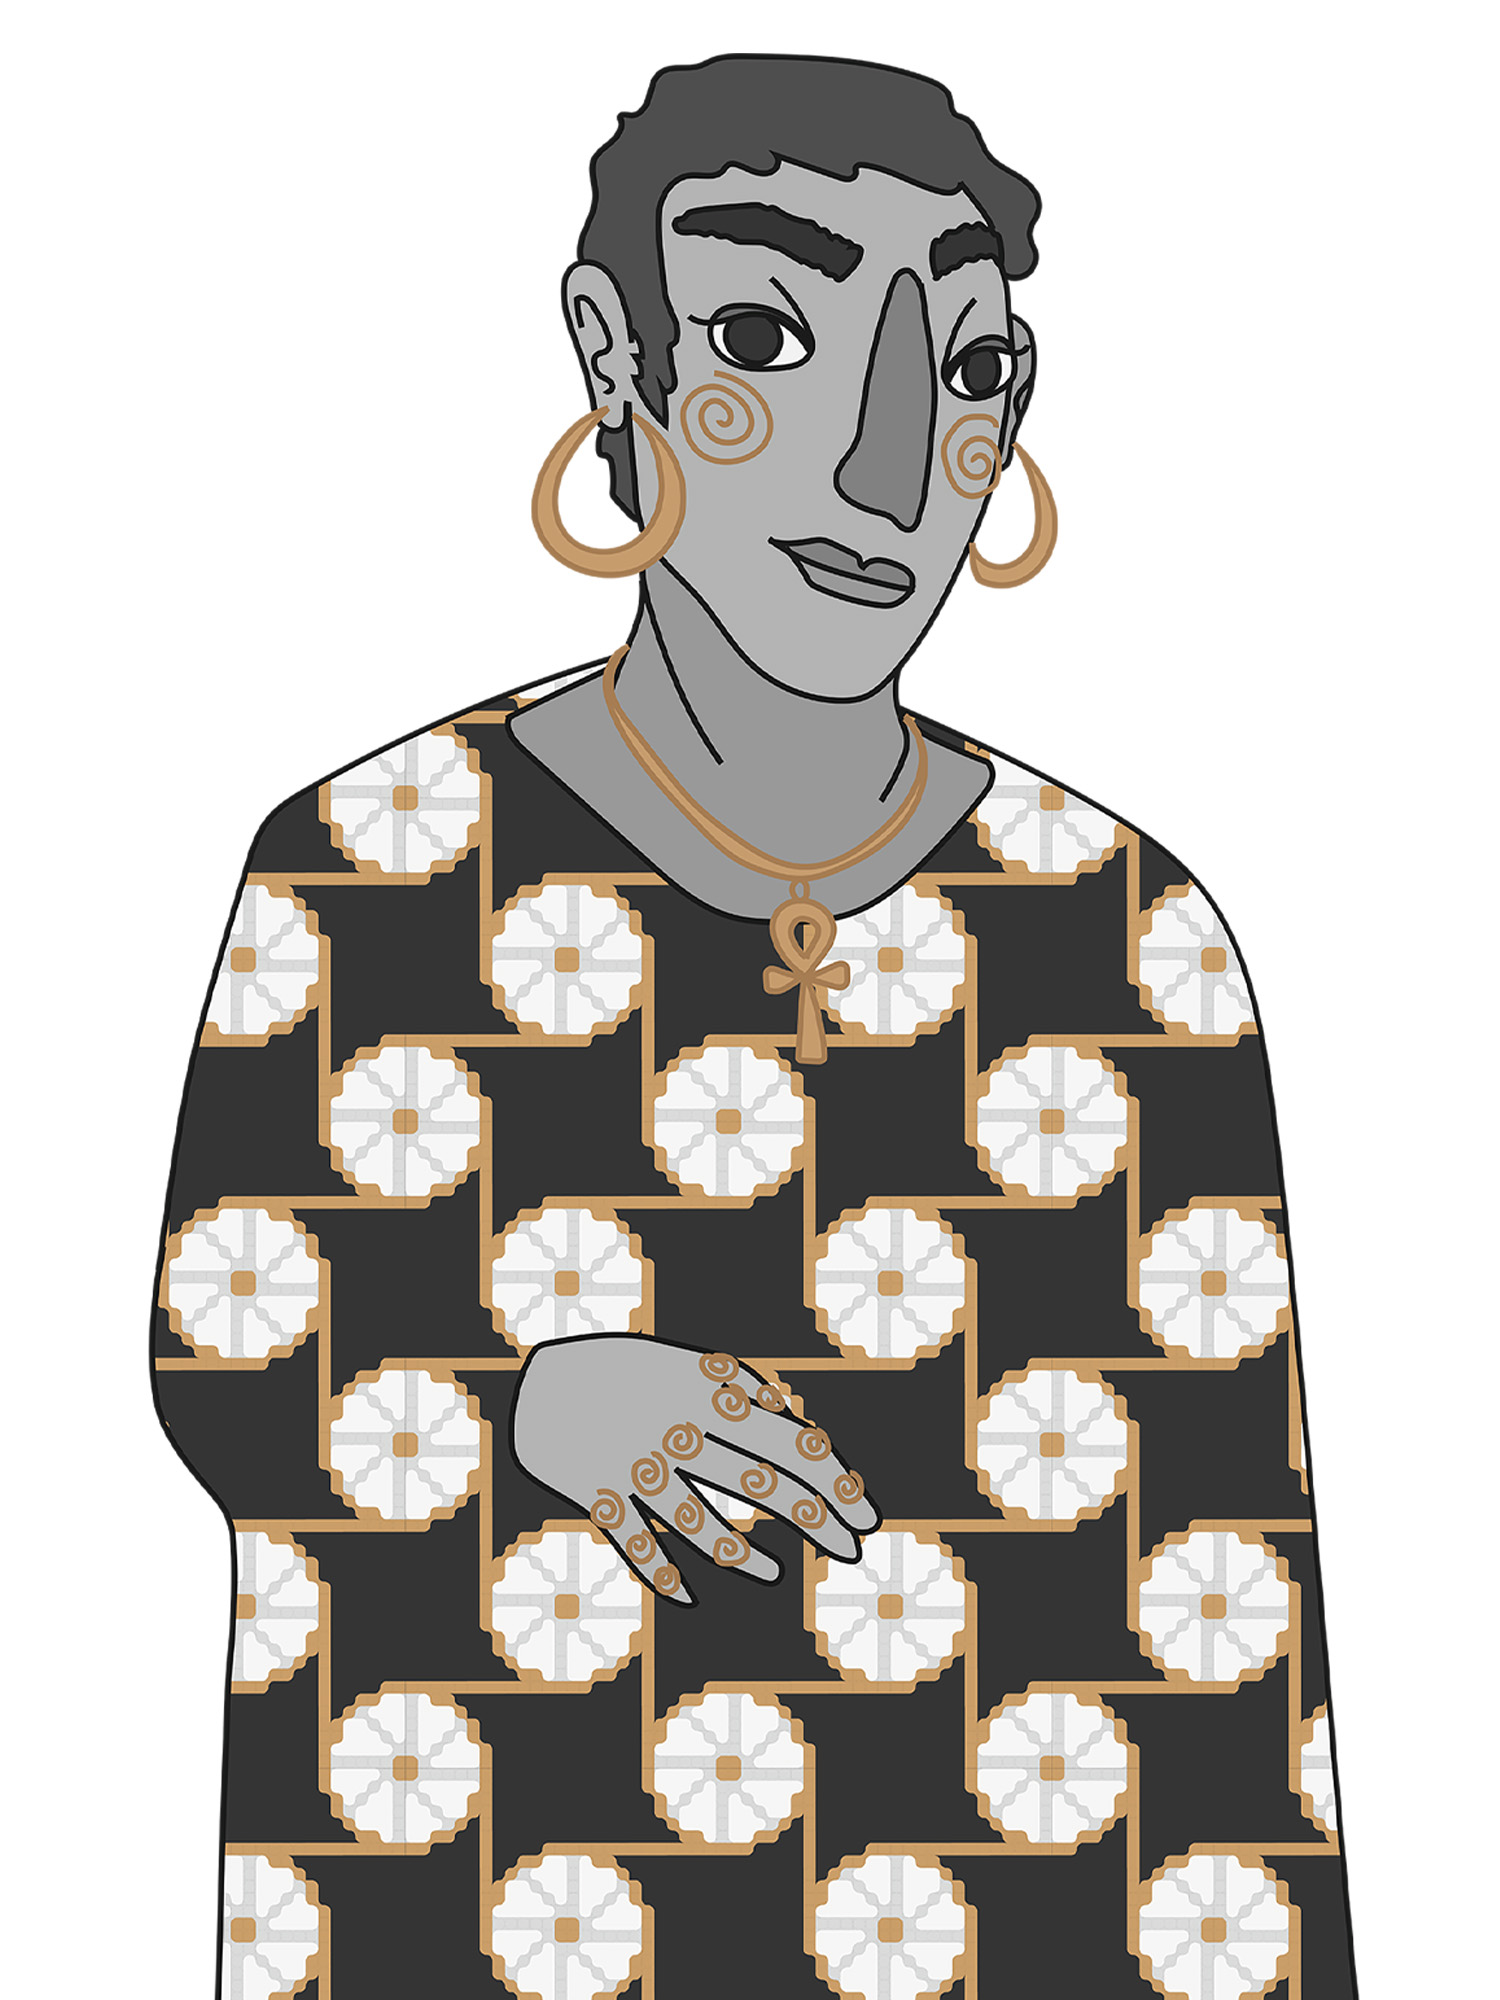 Illustrated Egyptian man wearing circular patterned clothes